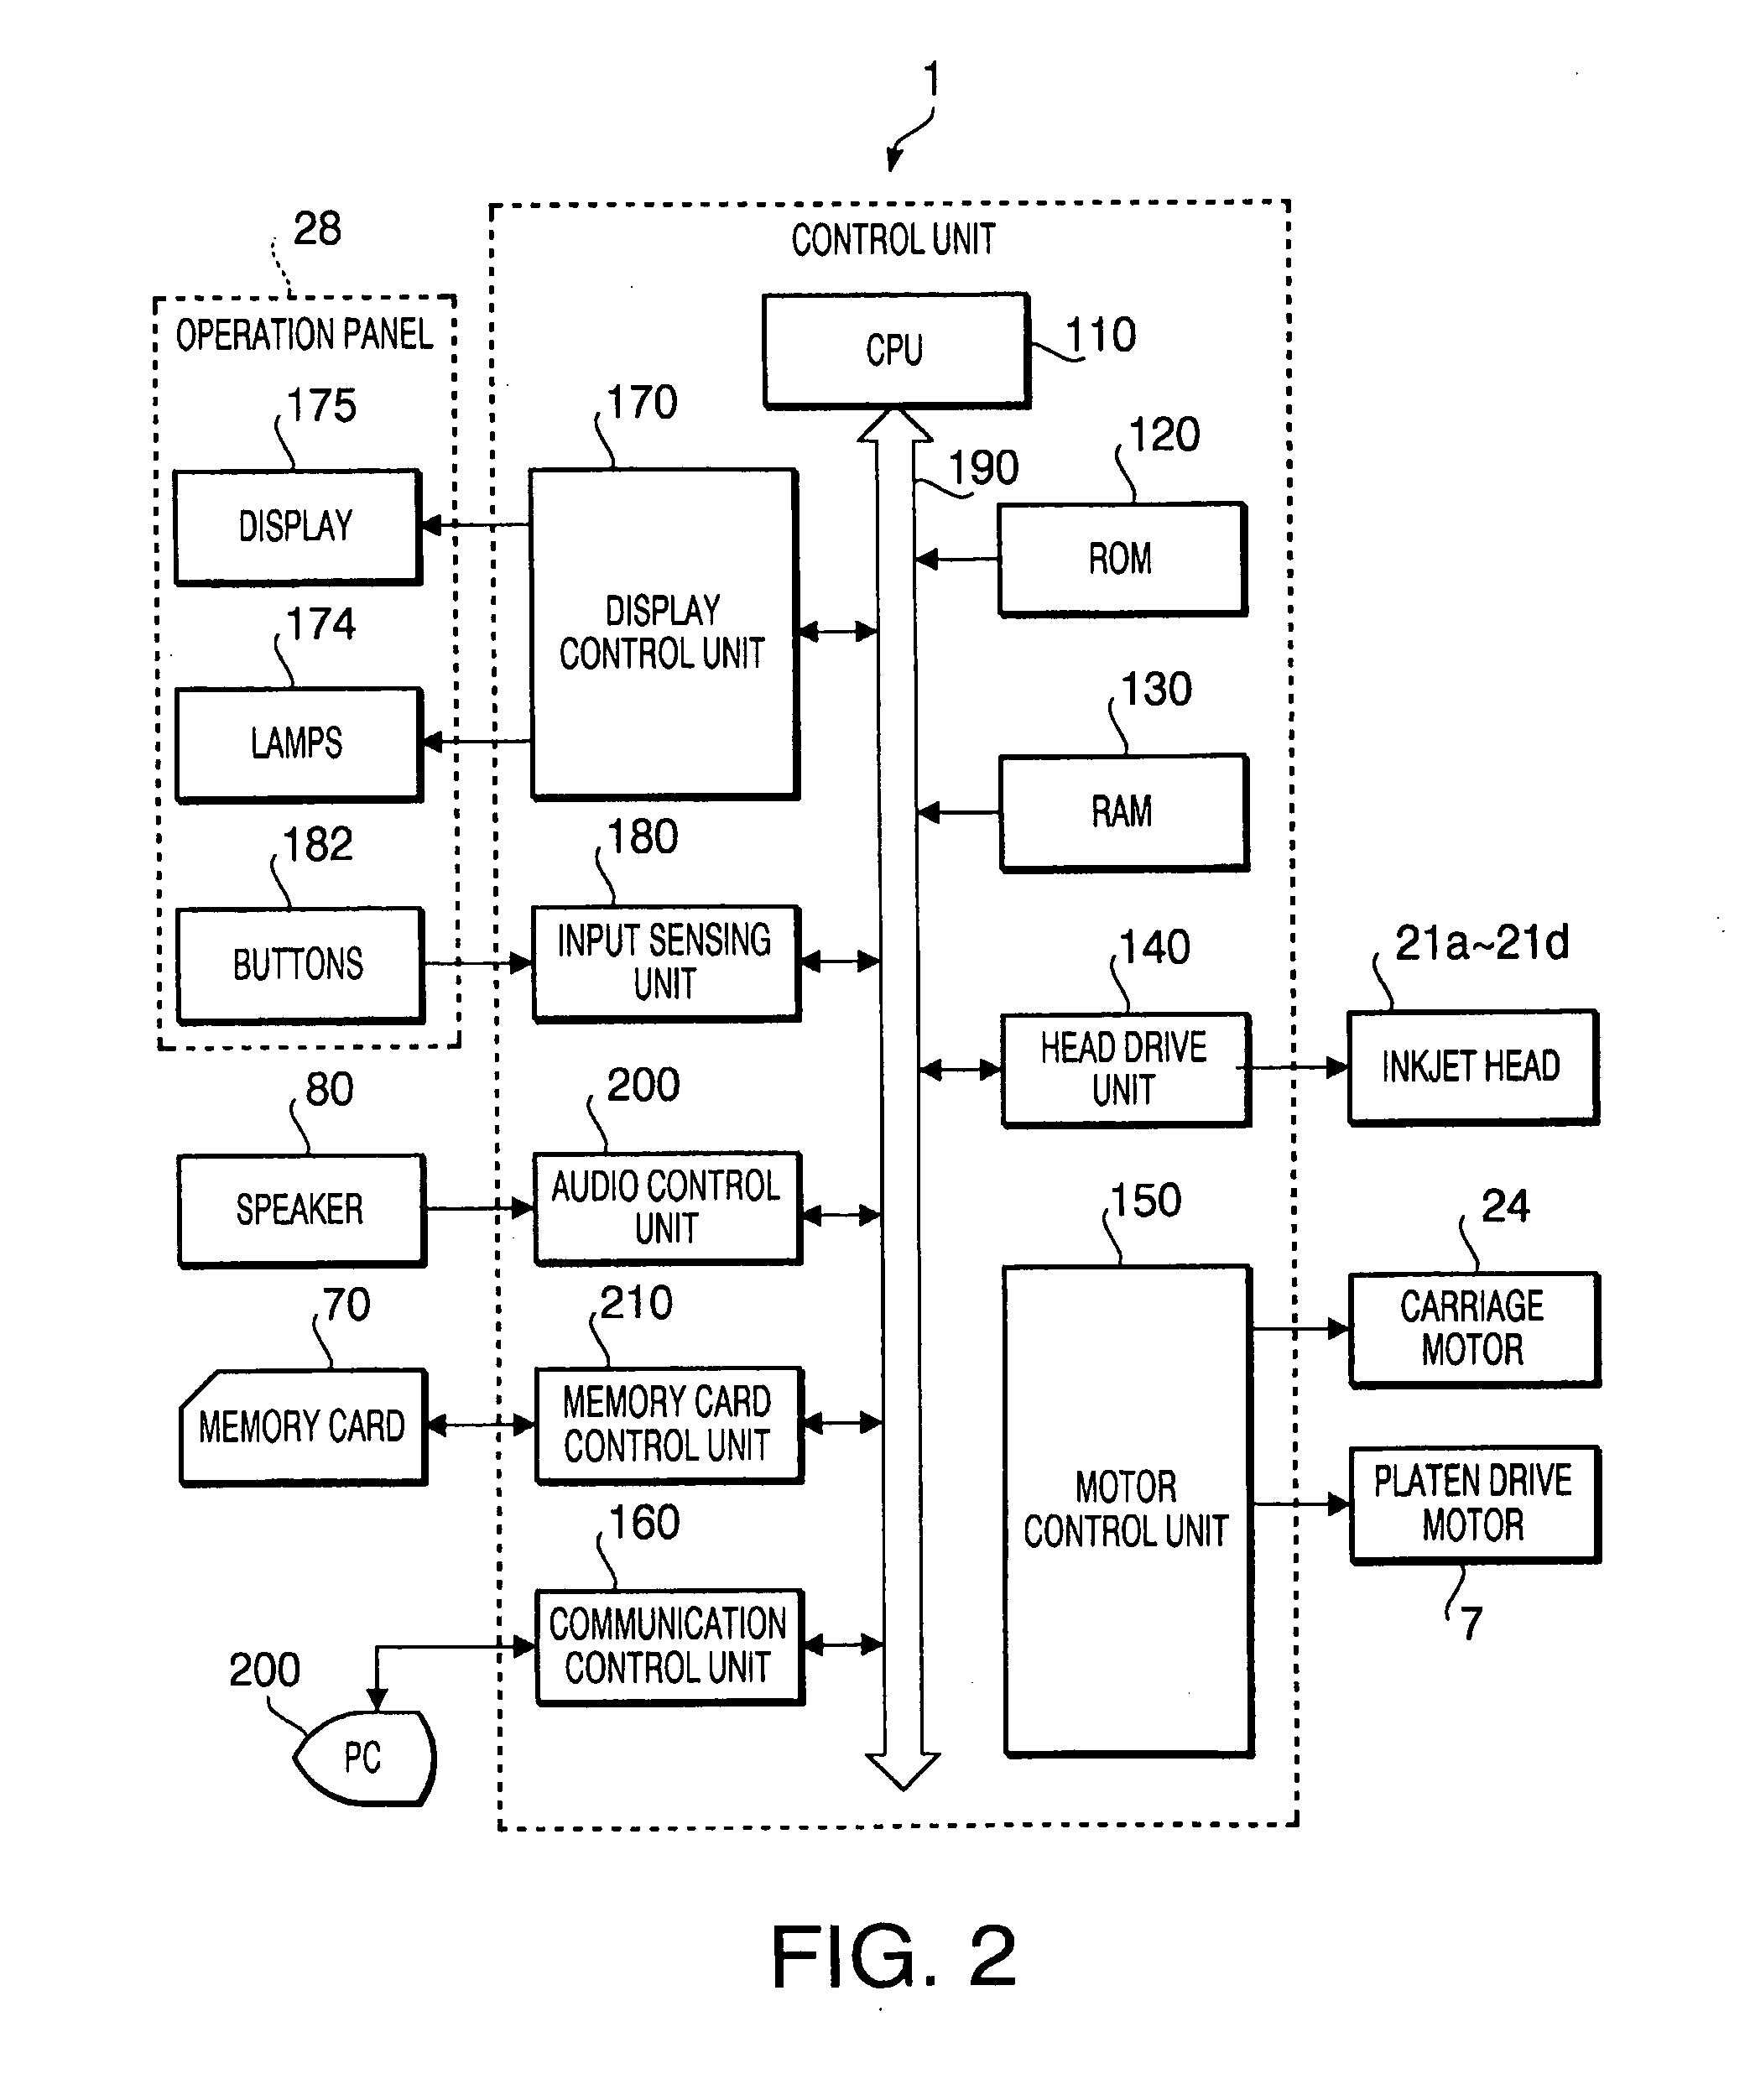 Printing apparatus, a method to indicate necessity of exchanging exchangeable parts, and a computer usable medium therefor